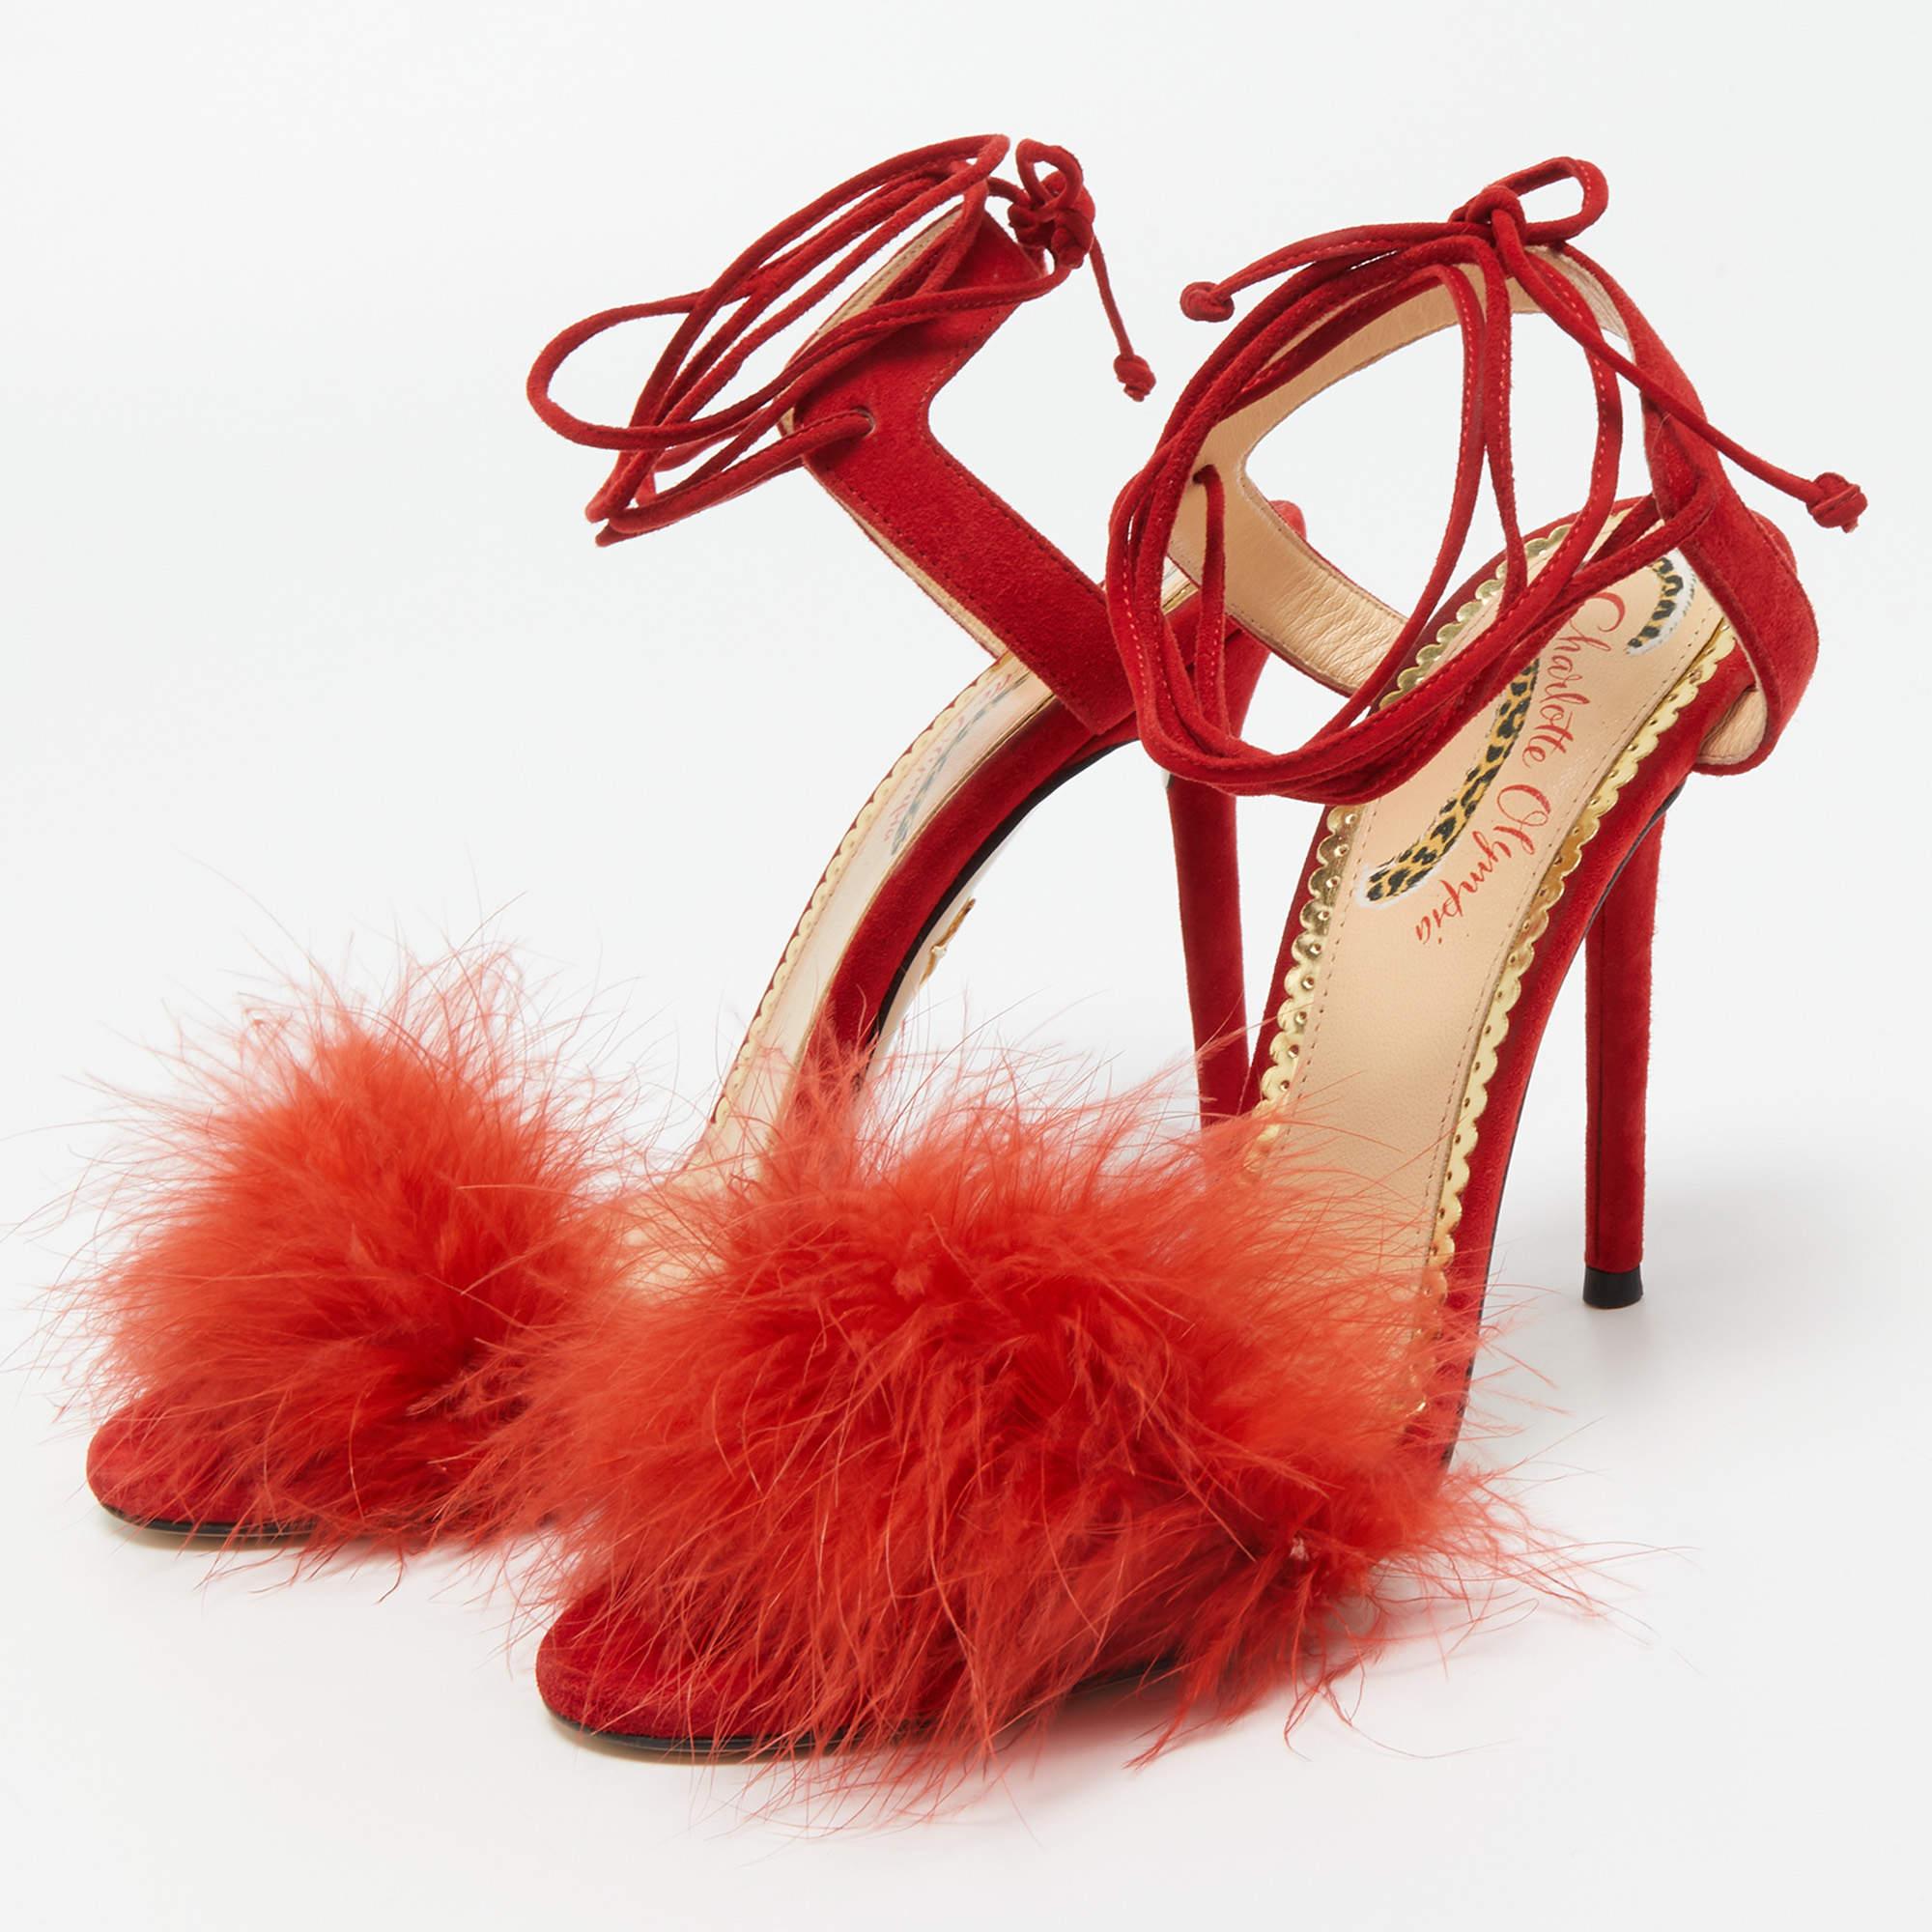 Women's Charlotte Olympia Red Suede and Fur Salsa Ankle Wrap Sandals Size 38.5